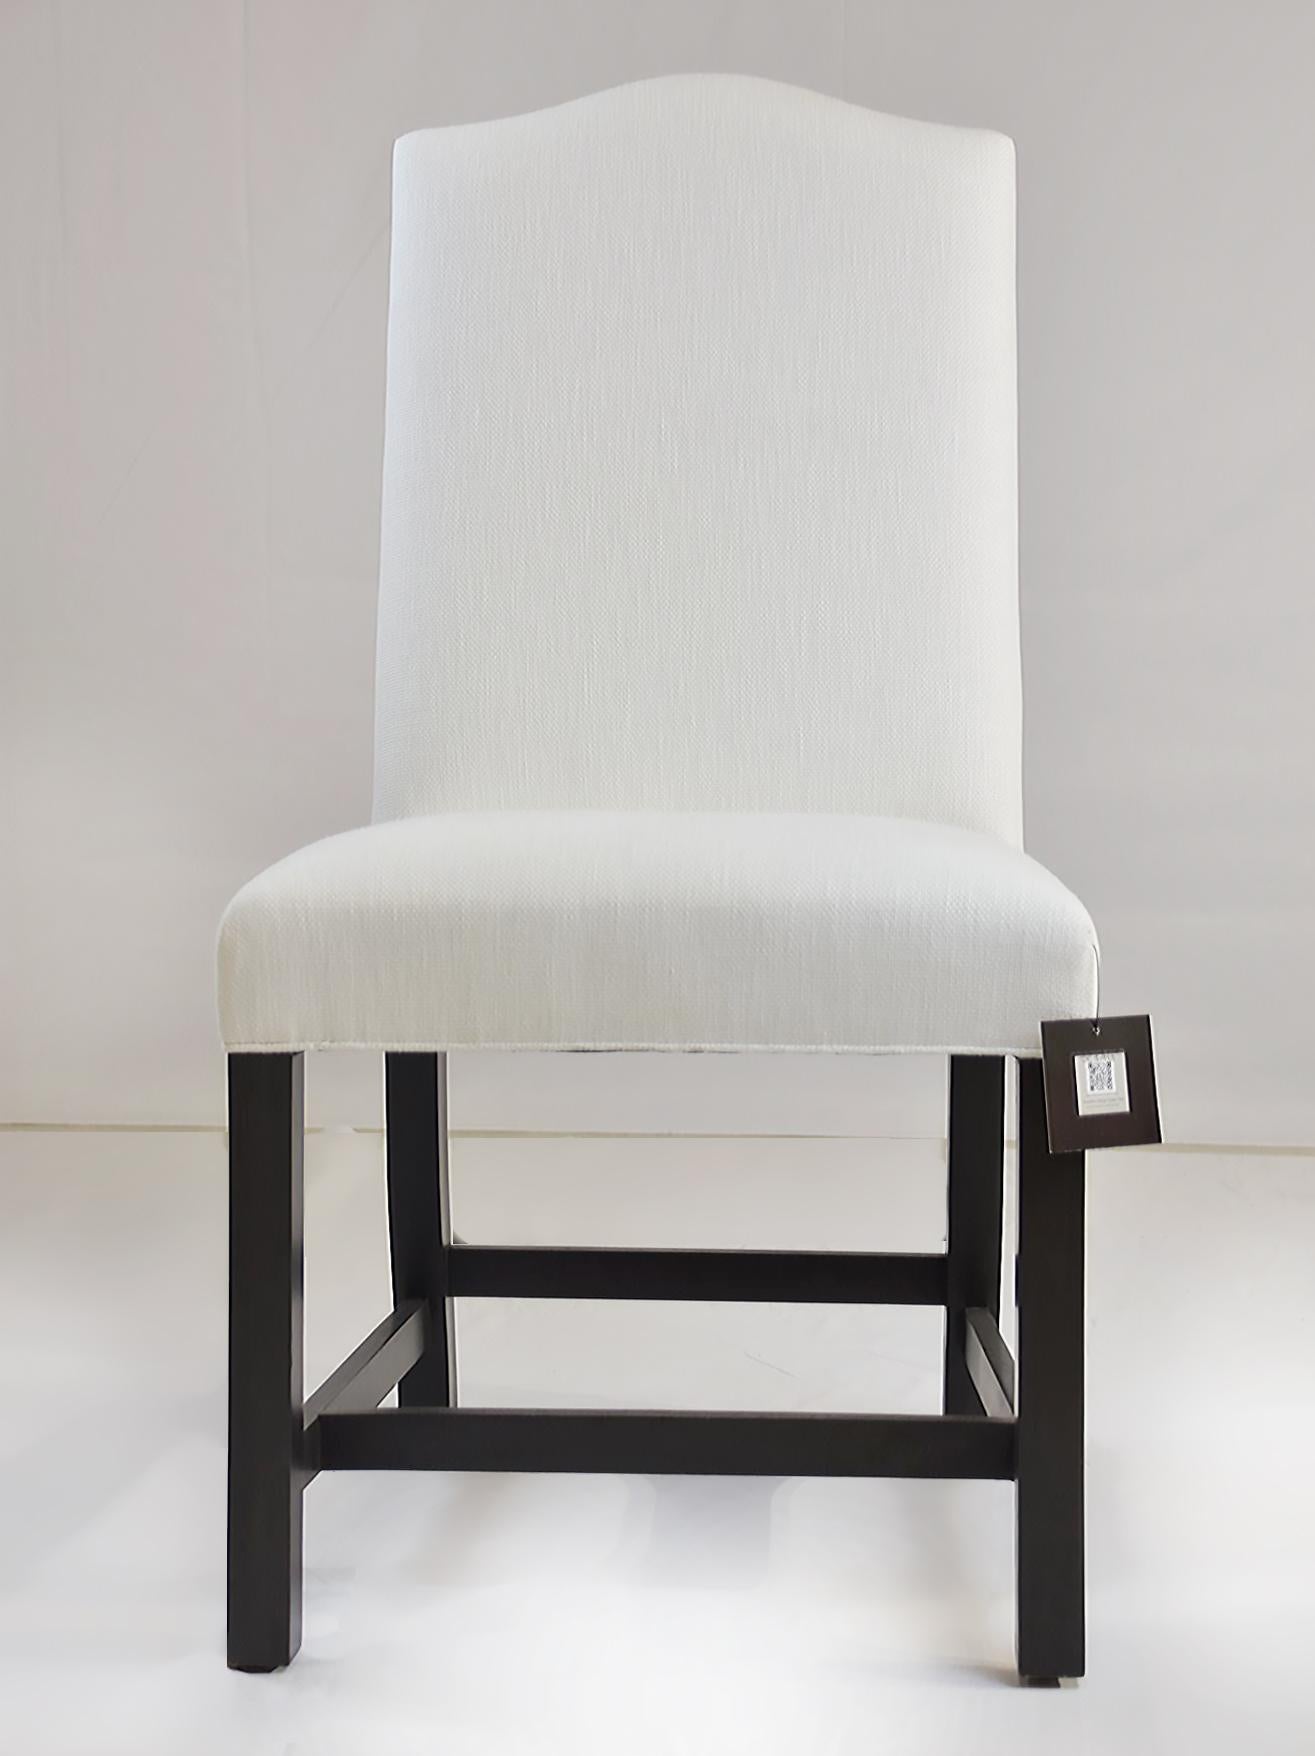  Le Jeune Upholstery Hampshire Armless Dining Side Chair DC1.923 Showroom Model	

 Offered for sale is a Le Jeune Upholstery HAMPSHIRE DC1.923	dining armless side chair created in an English style. The chair has a slight camel back detail on the top